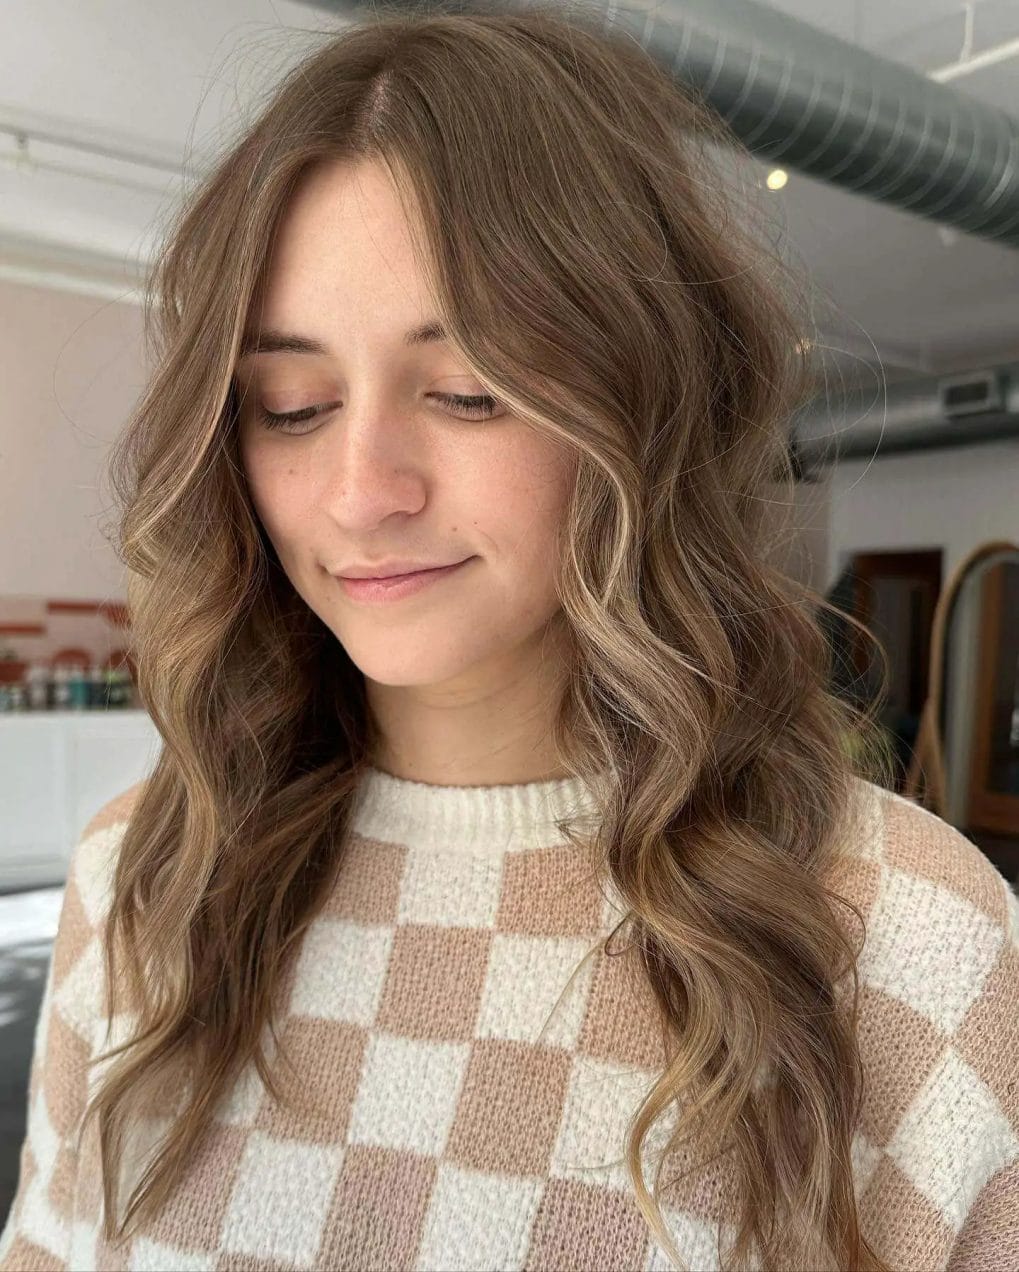 Relaxed waves with sun-faded balayage and ash-blonde highlights on hair.